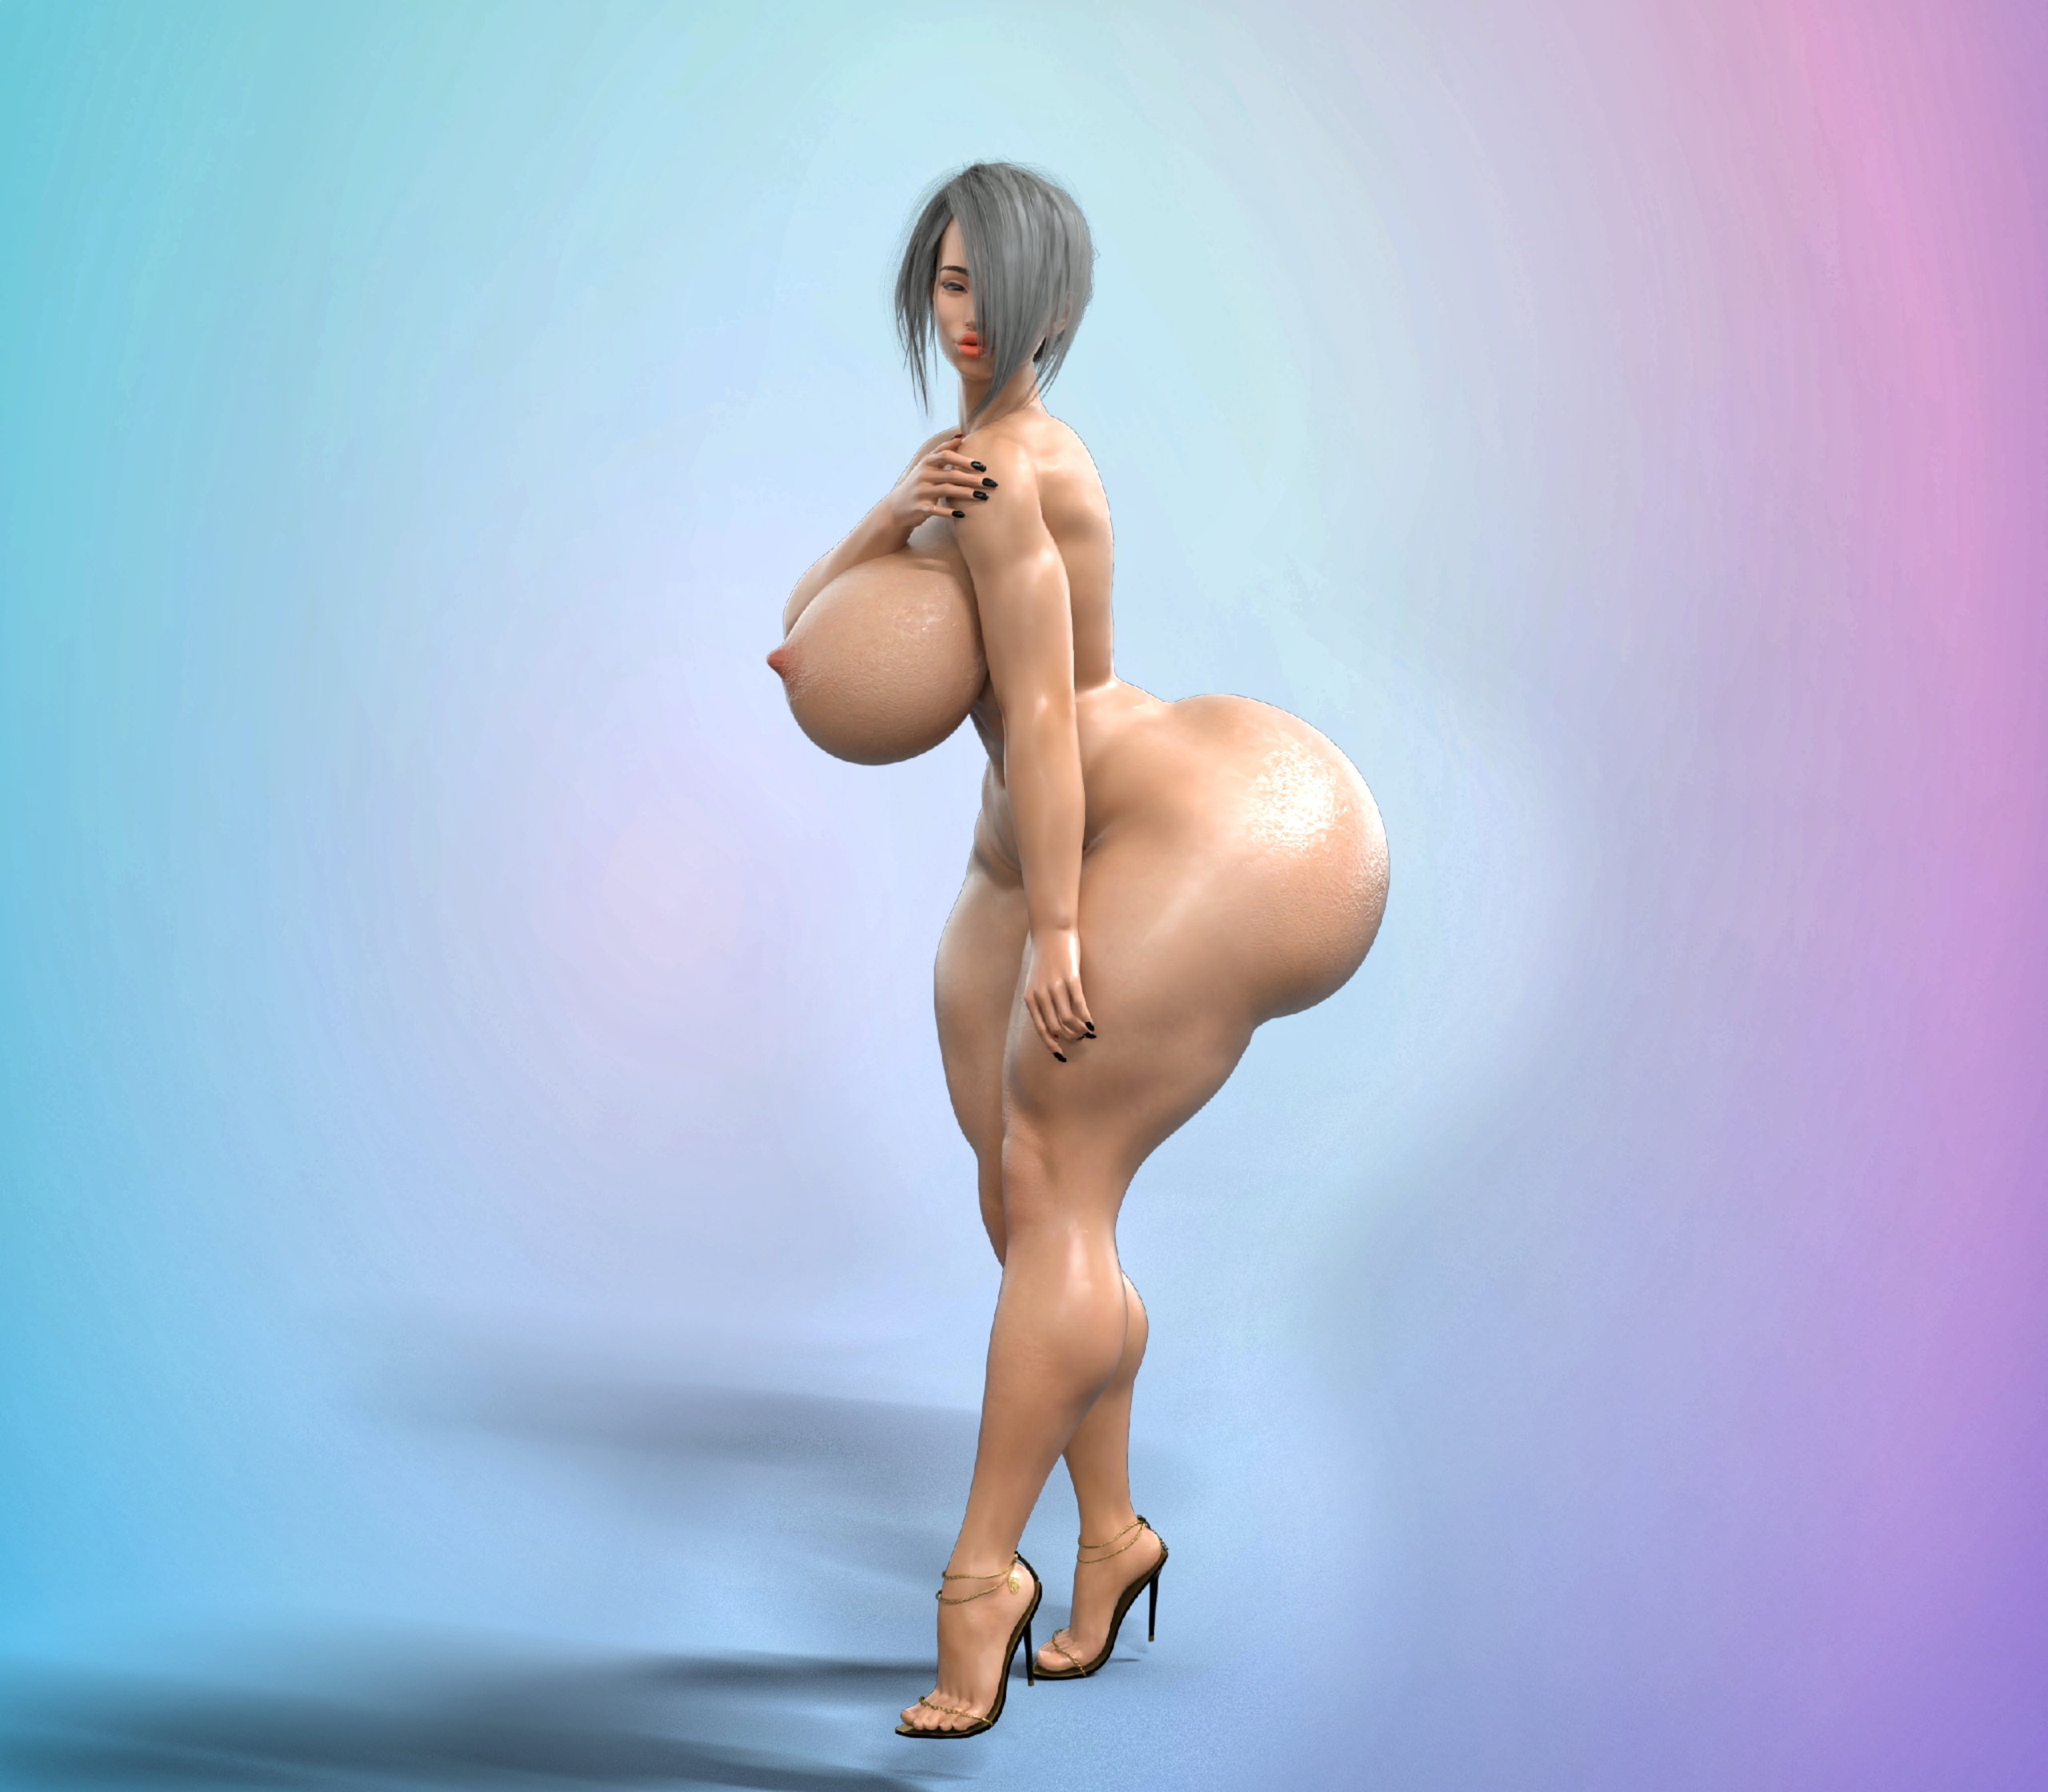 MOMMY PHOTOSHOOT Prison House Big Tits Big Ass Mom 3d Porn Thicc Thick Thighs Bimbo Sexy Woman Sexy Boobs Horny Face Nsfw 3d Girl 2